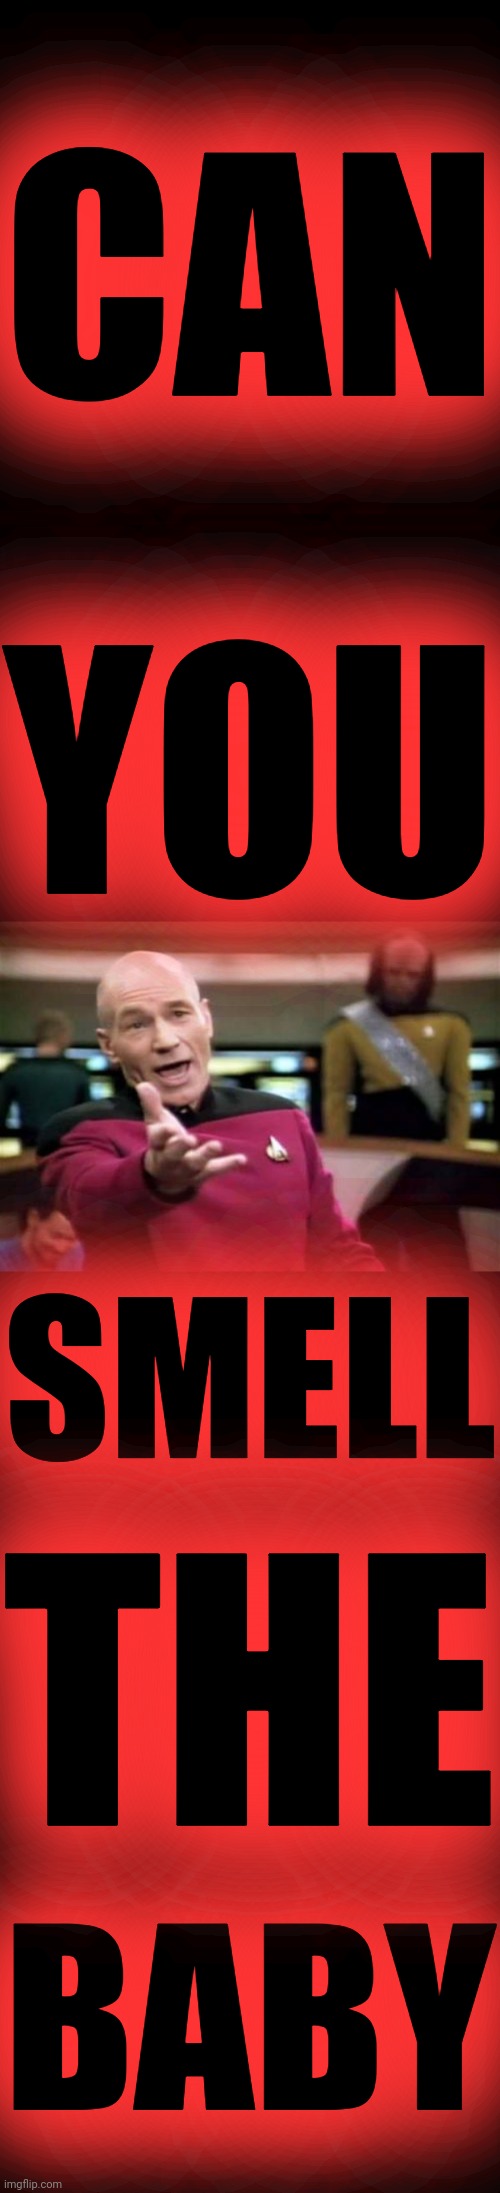 CAN BABY YOU SMELL THE | image tagged in memes,picard wtf,black background | made w/ Imgflip meme maker